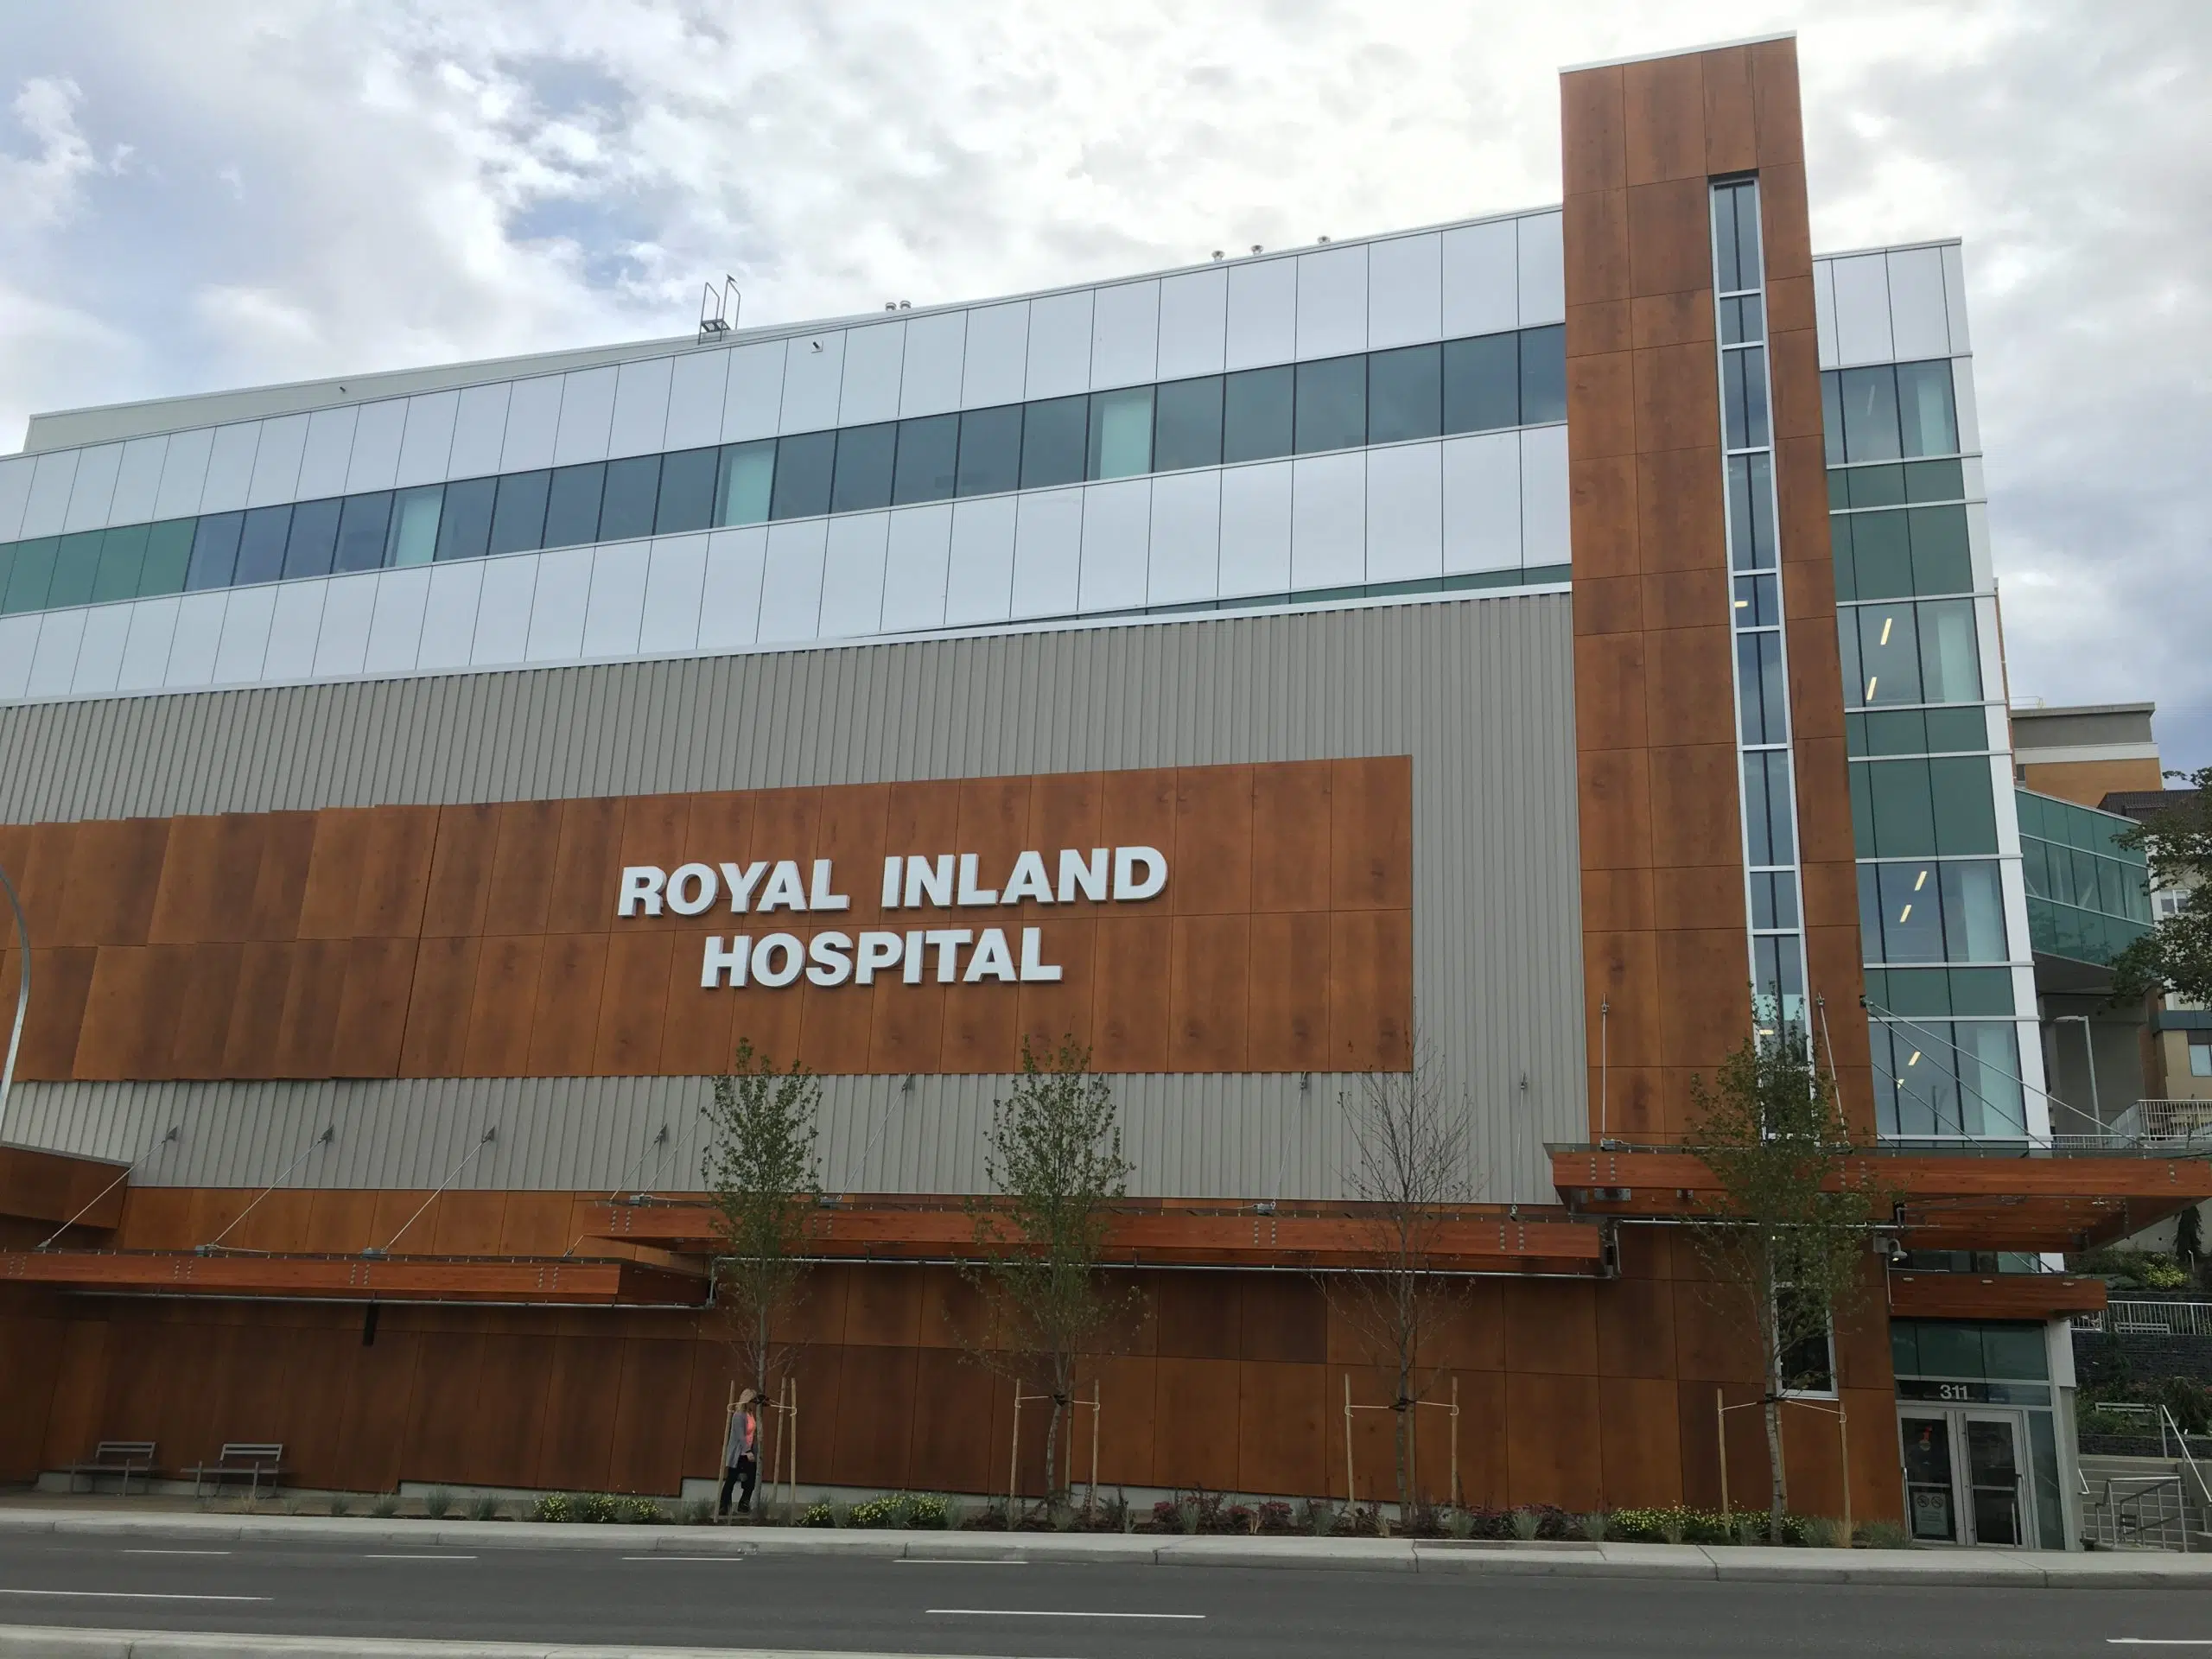 Some good news on the Royal Inland Hospital data breach front